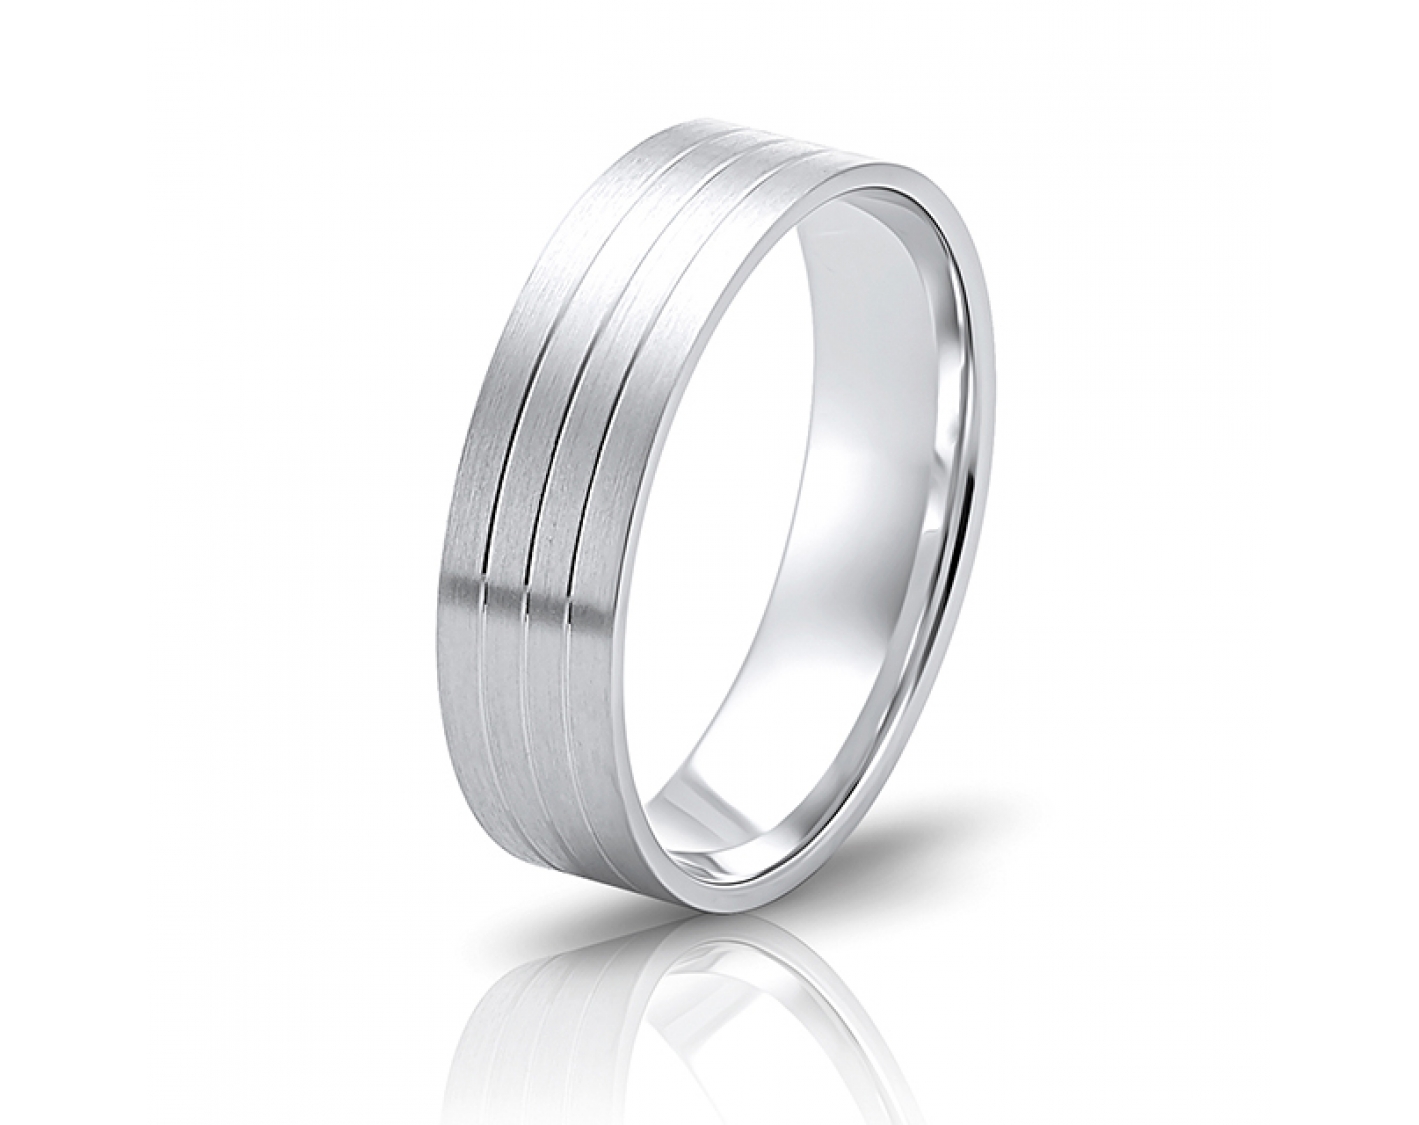 18k white gold 6mm matte wedding band with inlays